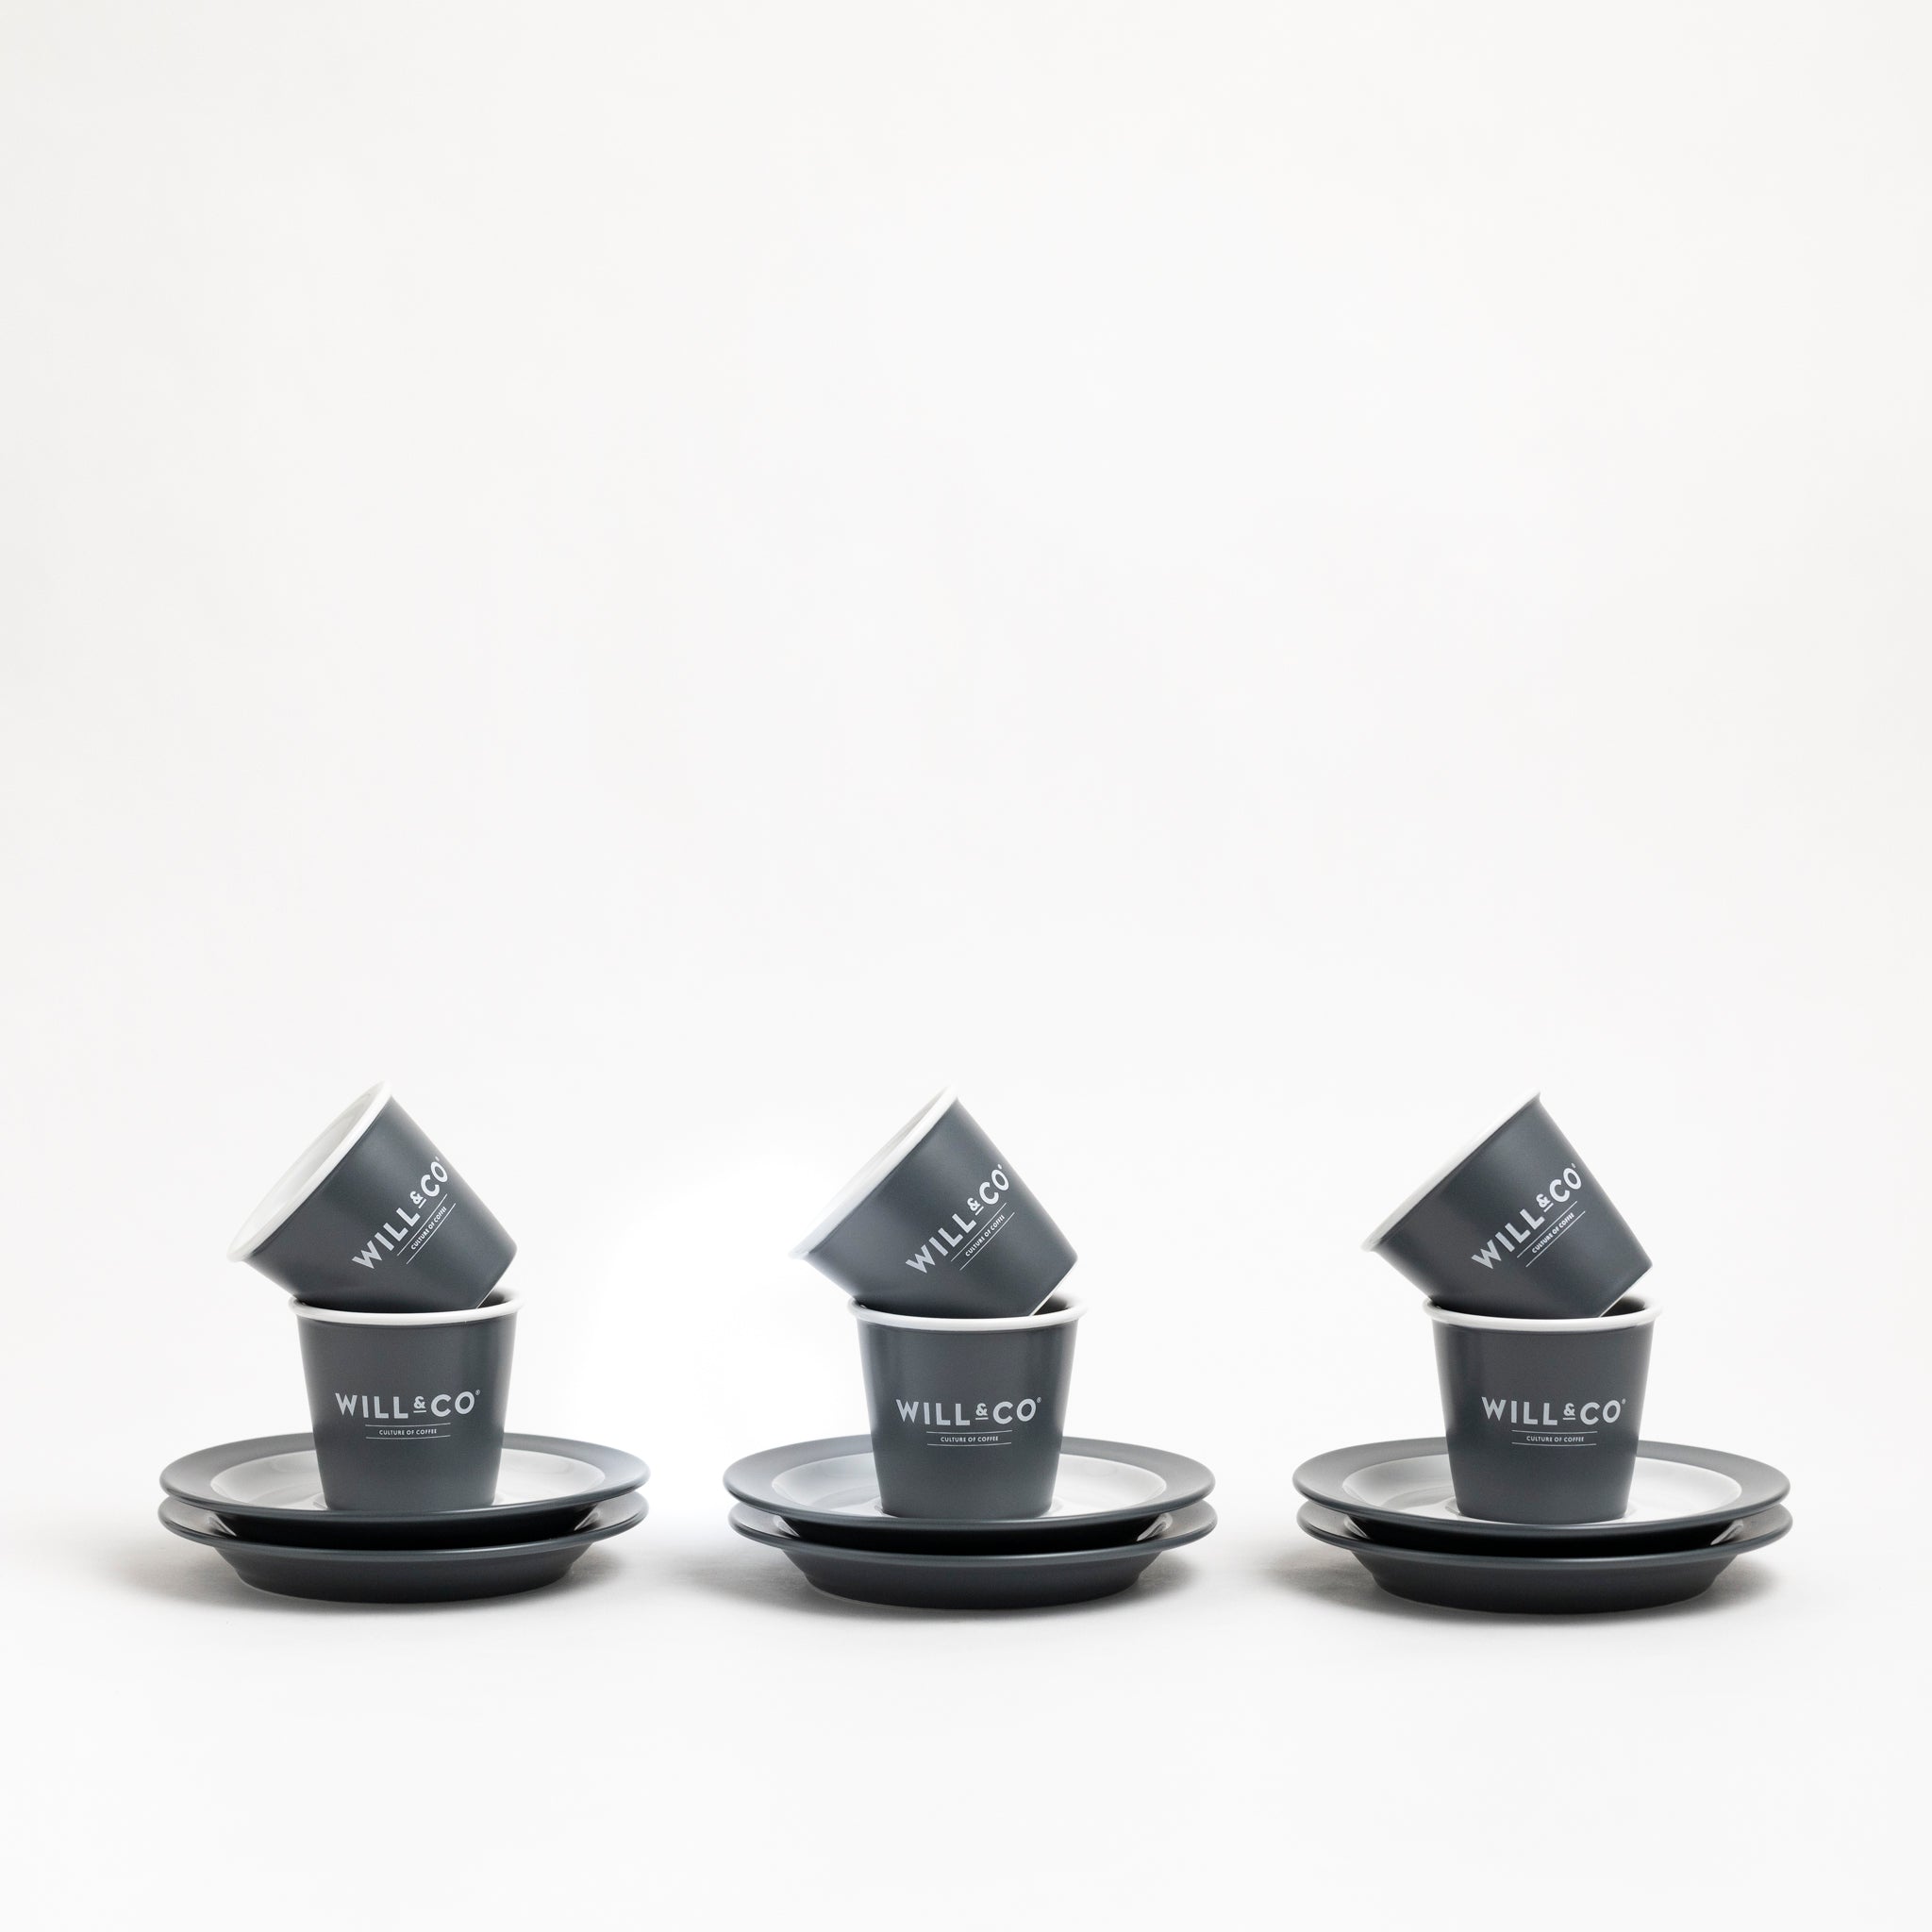 Espresso Cup & Saucer Set - Will & Co Coffee